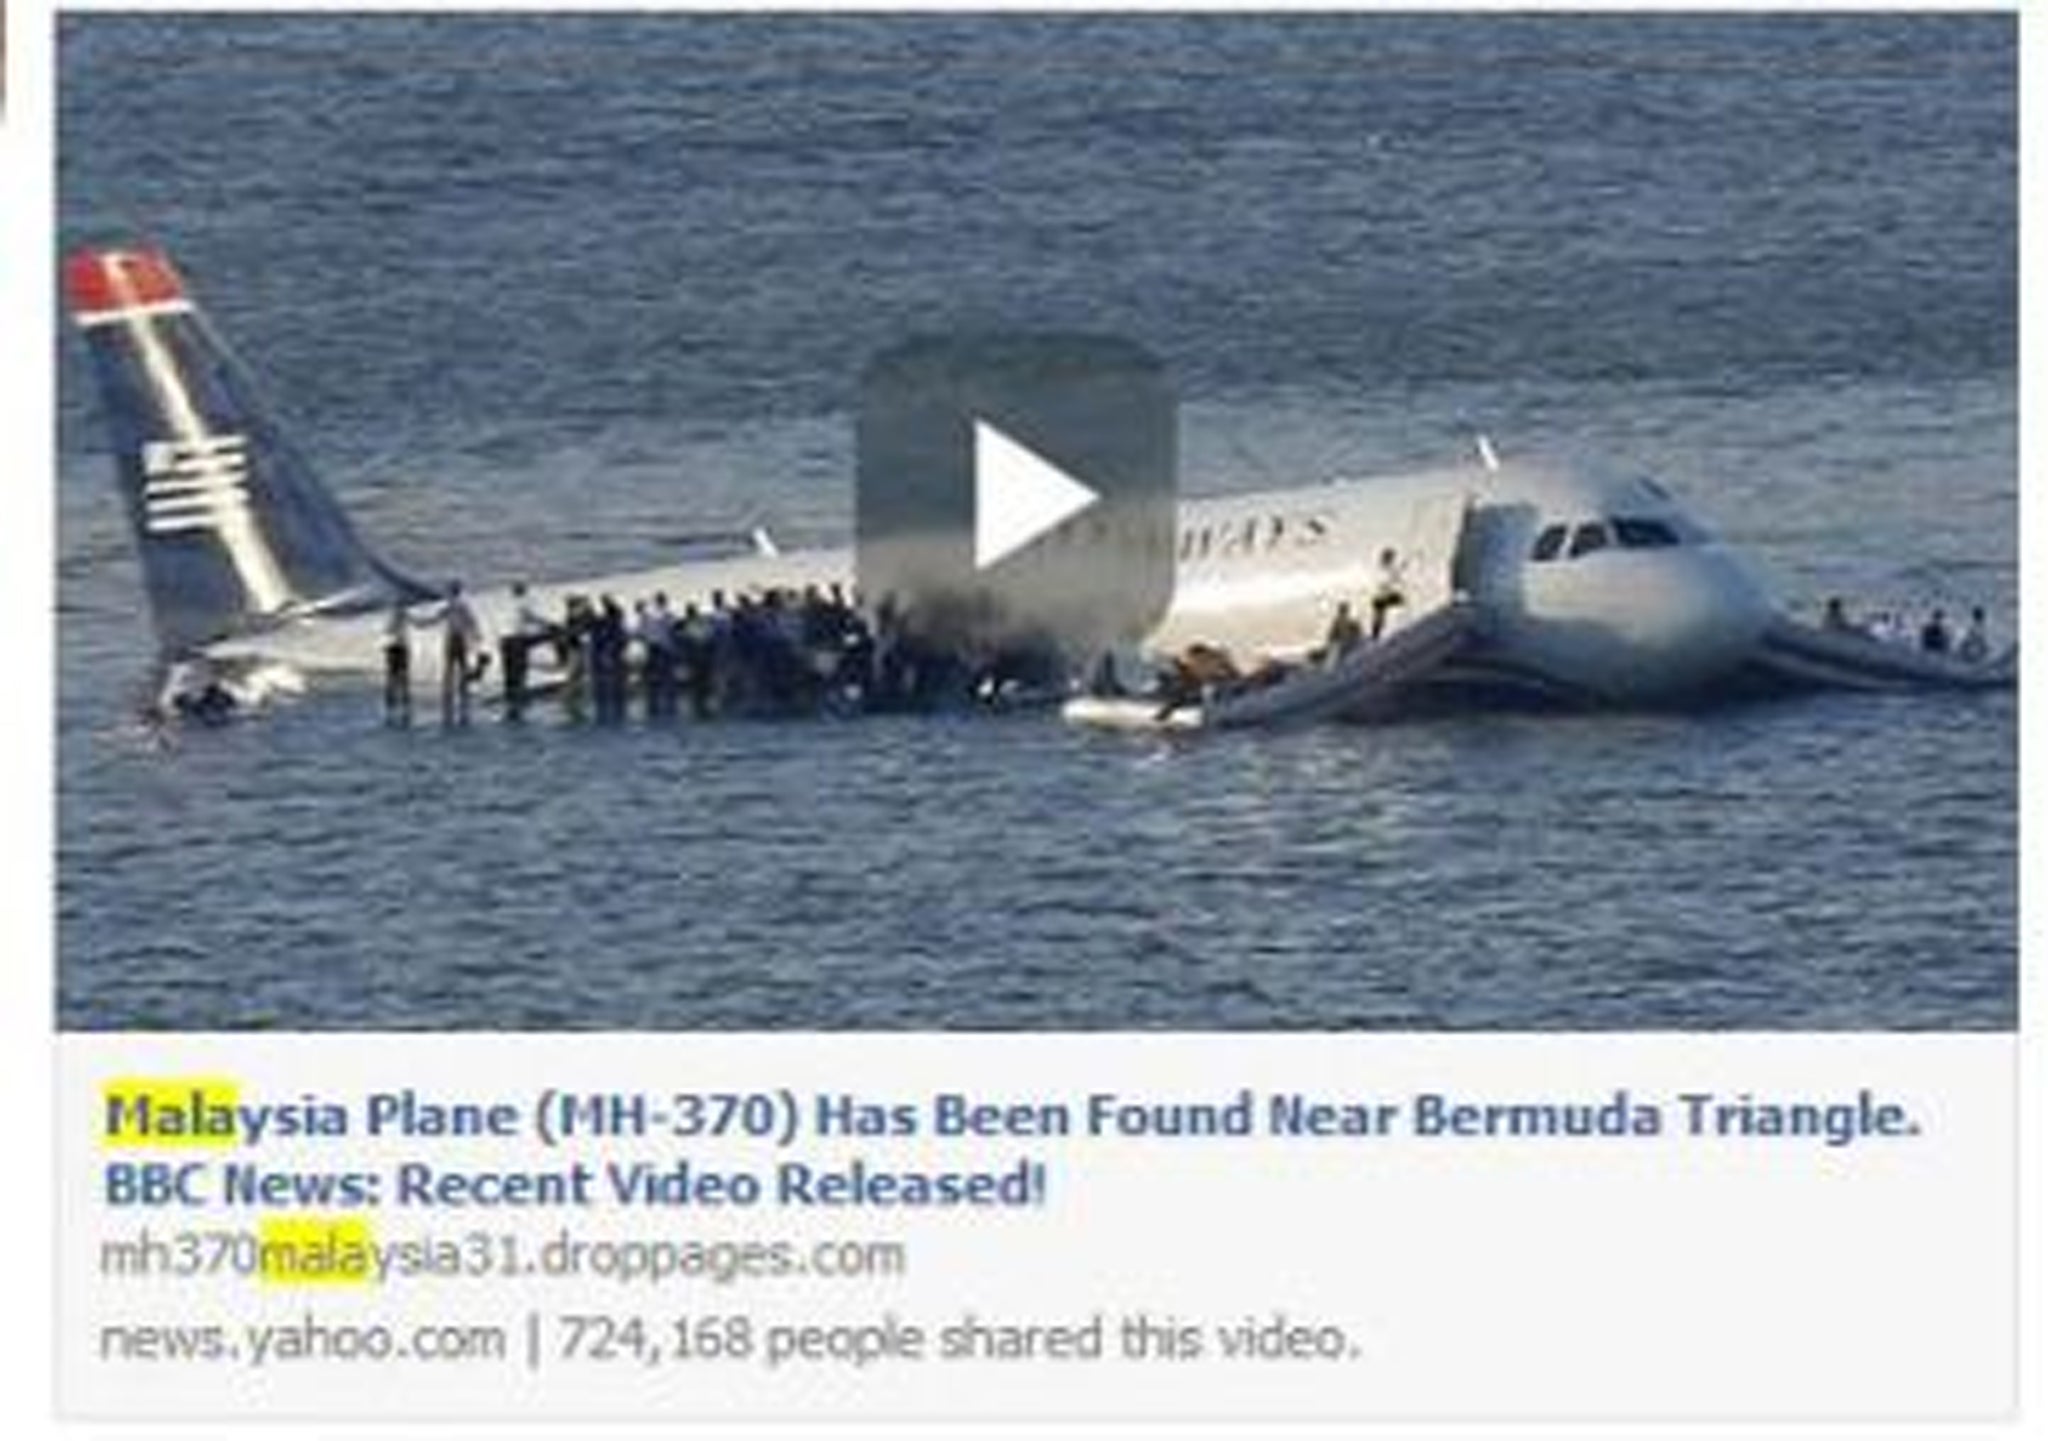 The posts contain videos that look legitimate and claim the plane has been found in various places, from the Bermuda Triangle to having been spotted at sea